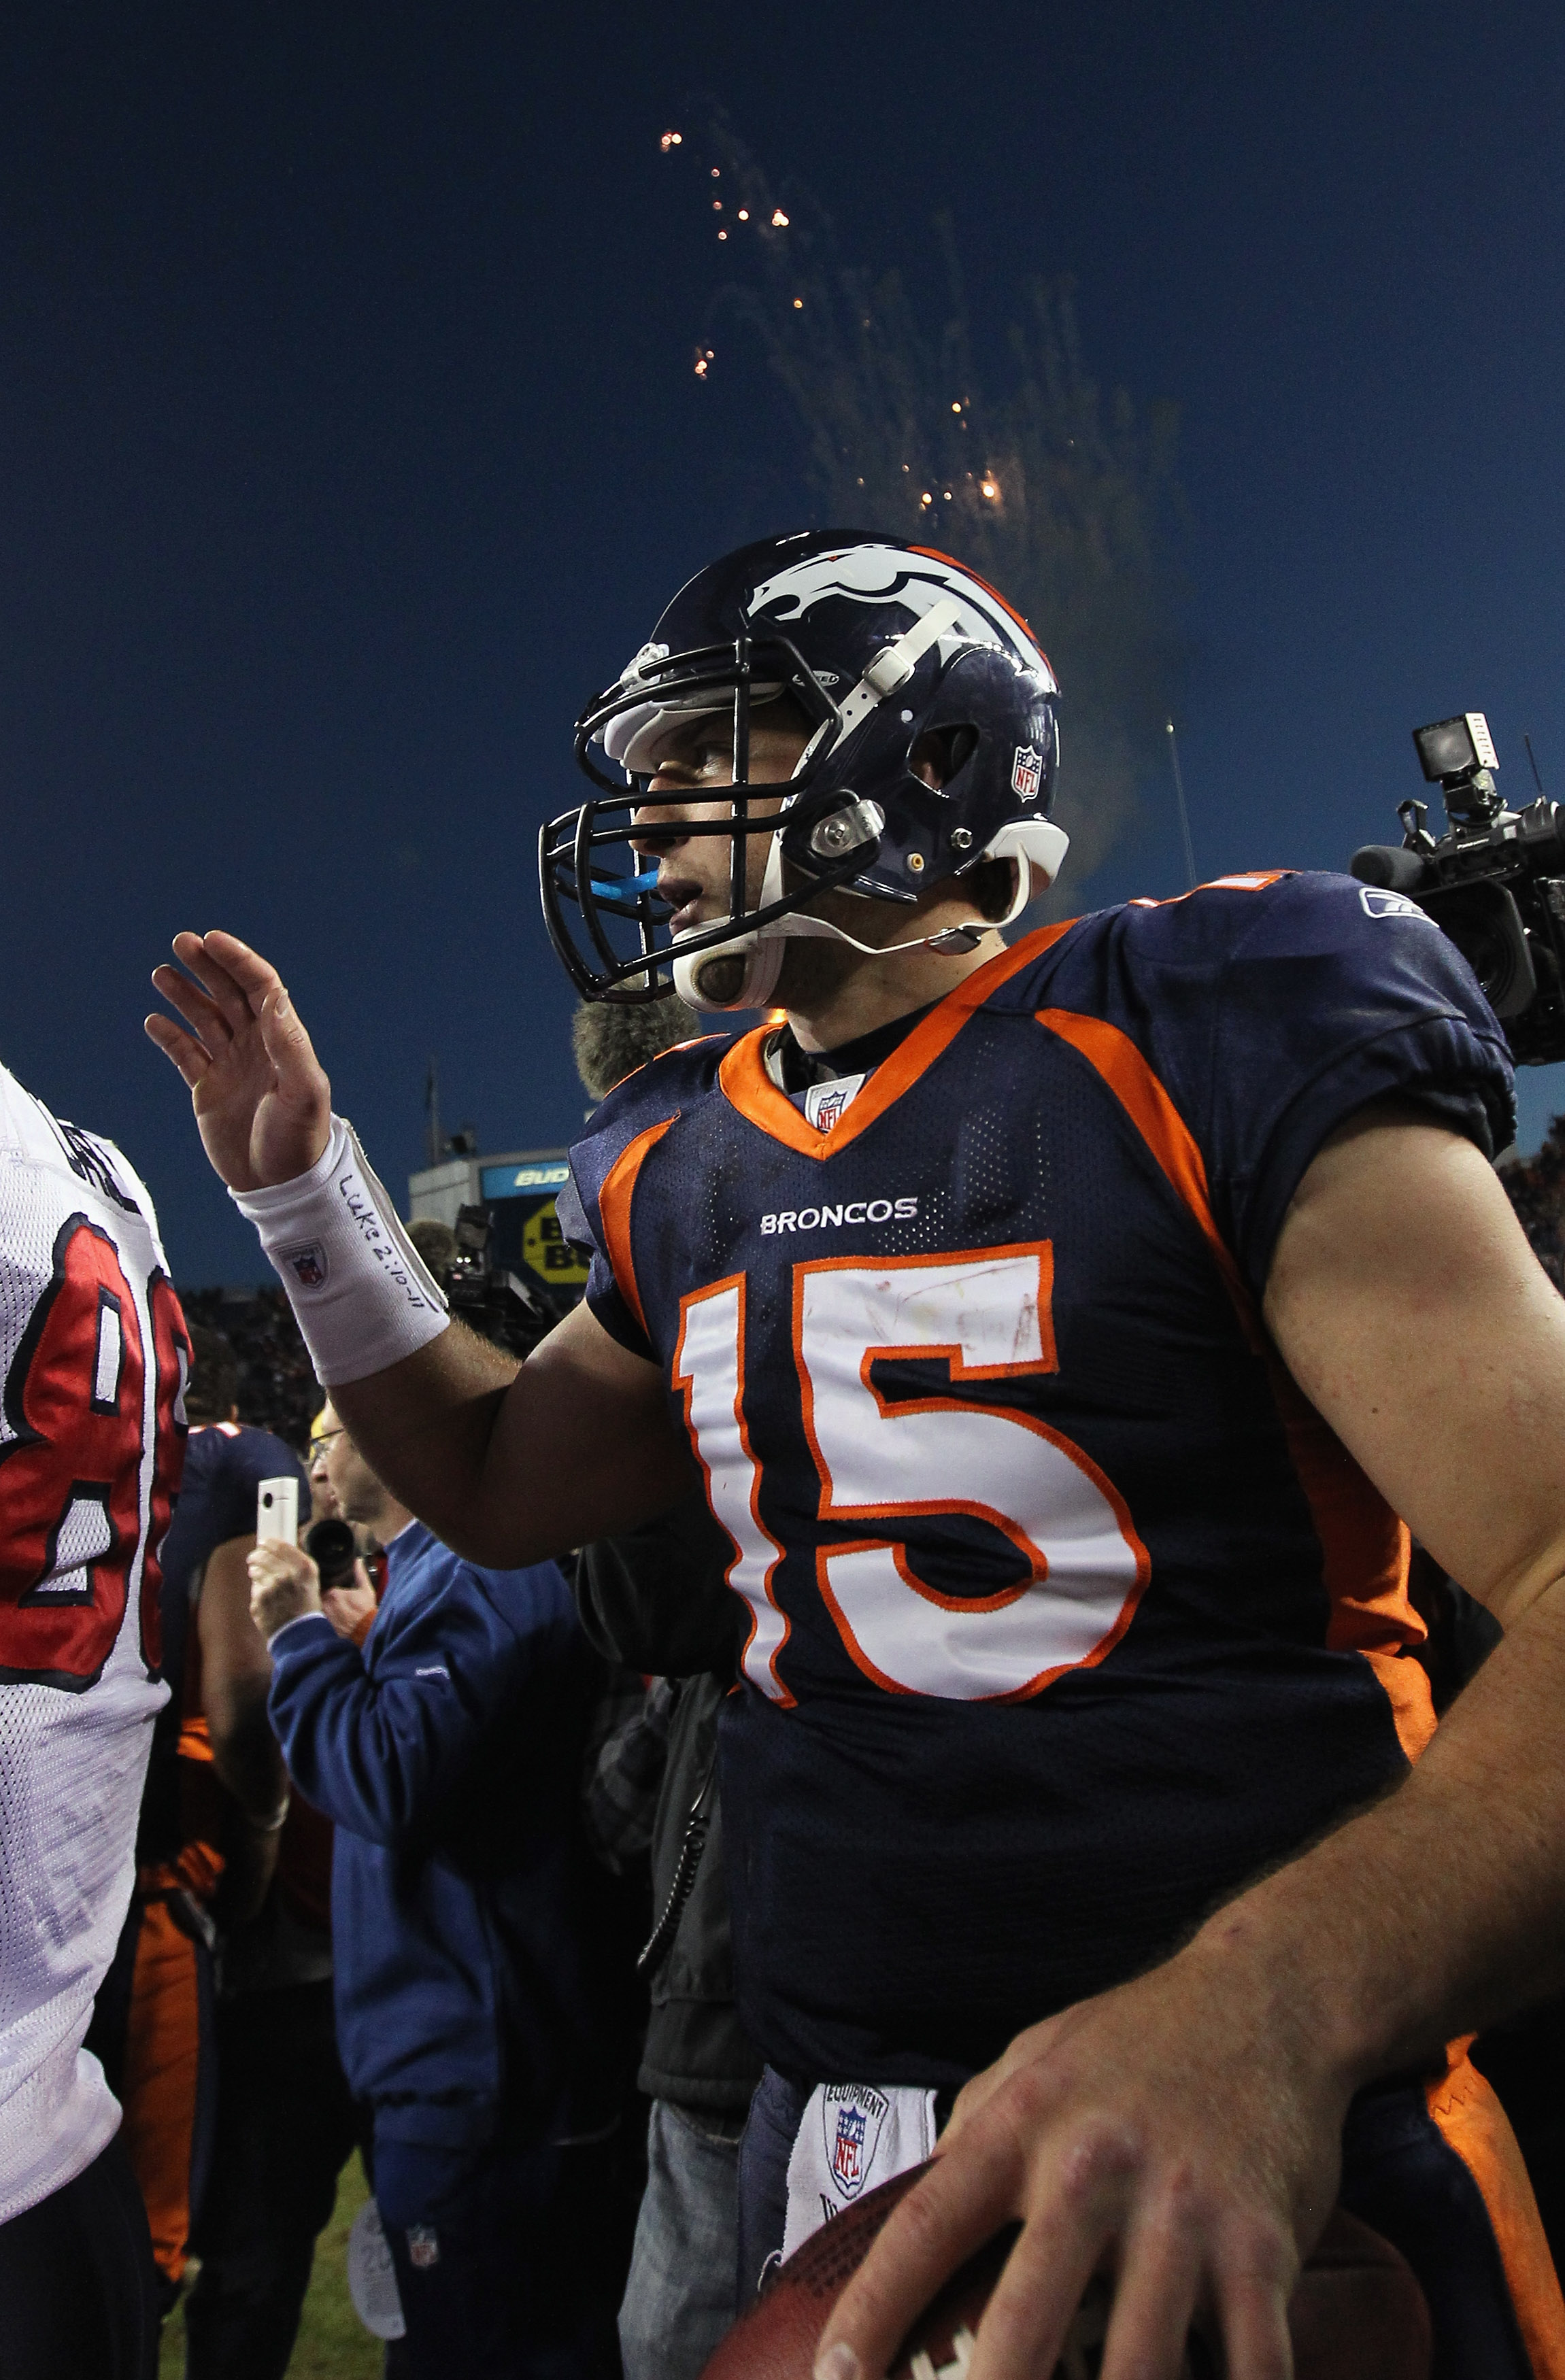 DENVER - DECEMBER 26:  Quarterback Tim Tebow #15 of the Denver Broncos greets members of the Houston Texas at midfield after the game at INVESCO Field at Mile High on December 26, 2010 in Denver, Colorado. The Broncos defeated the Texans 24-23.  (Photo by